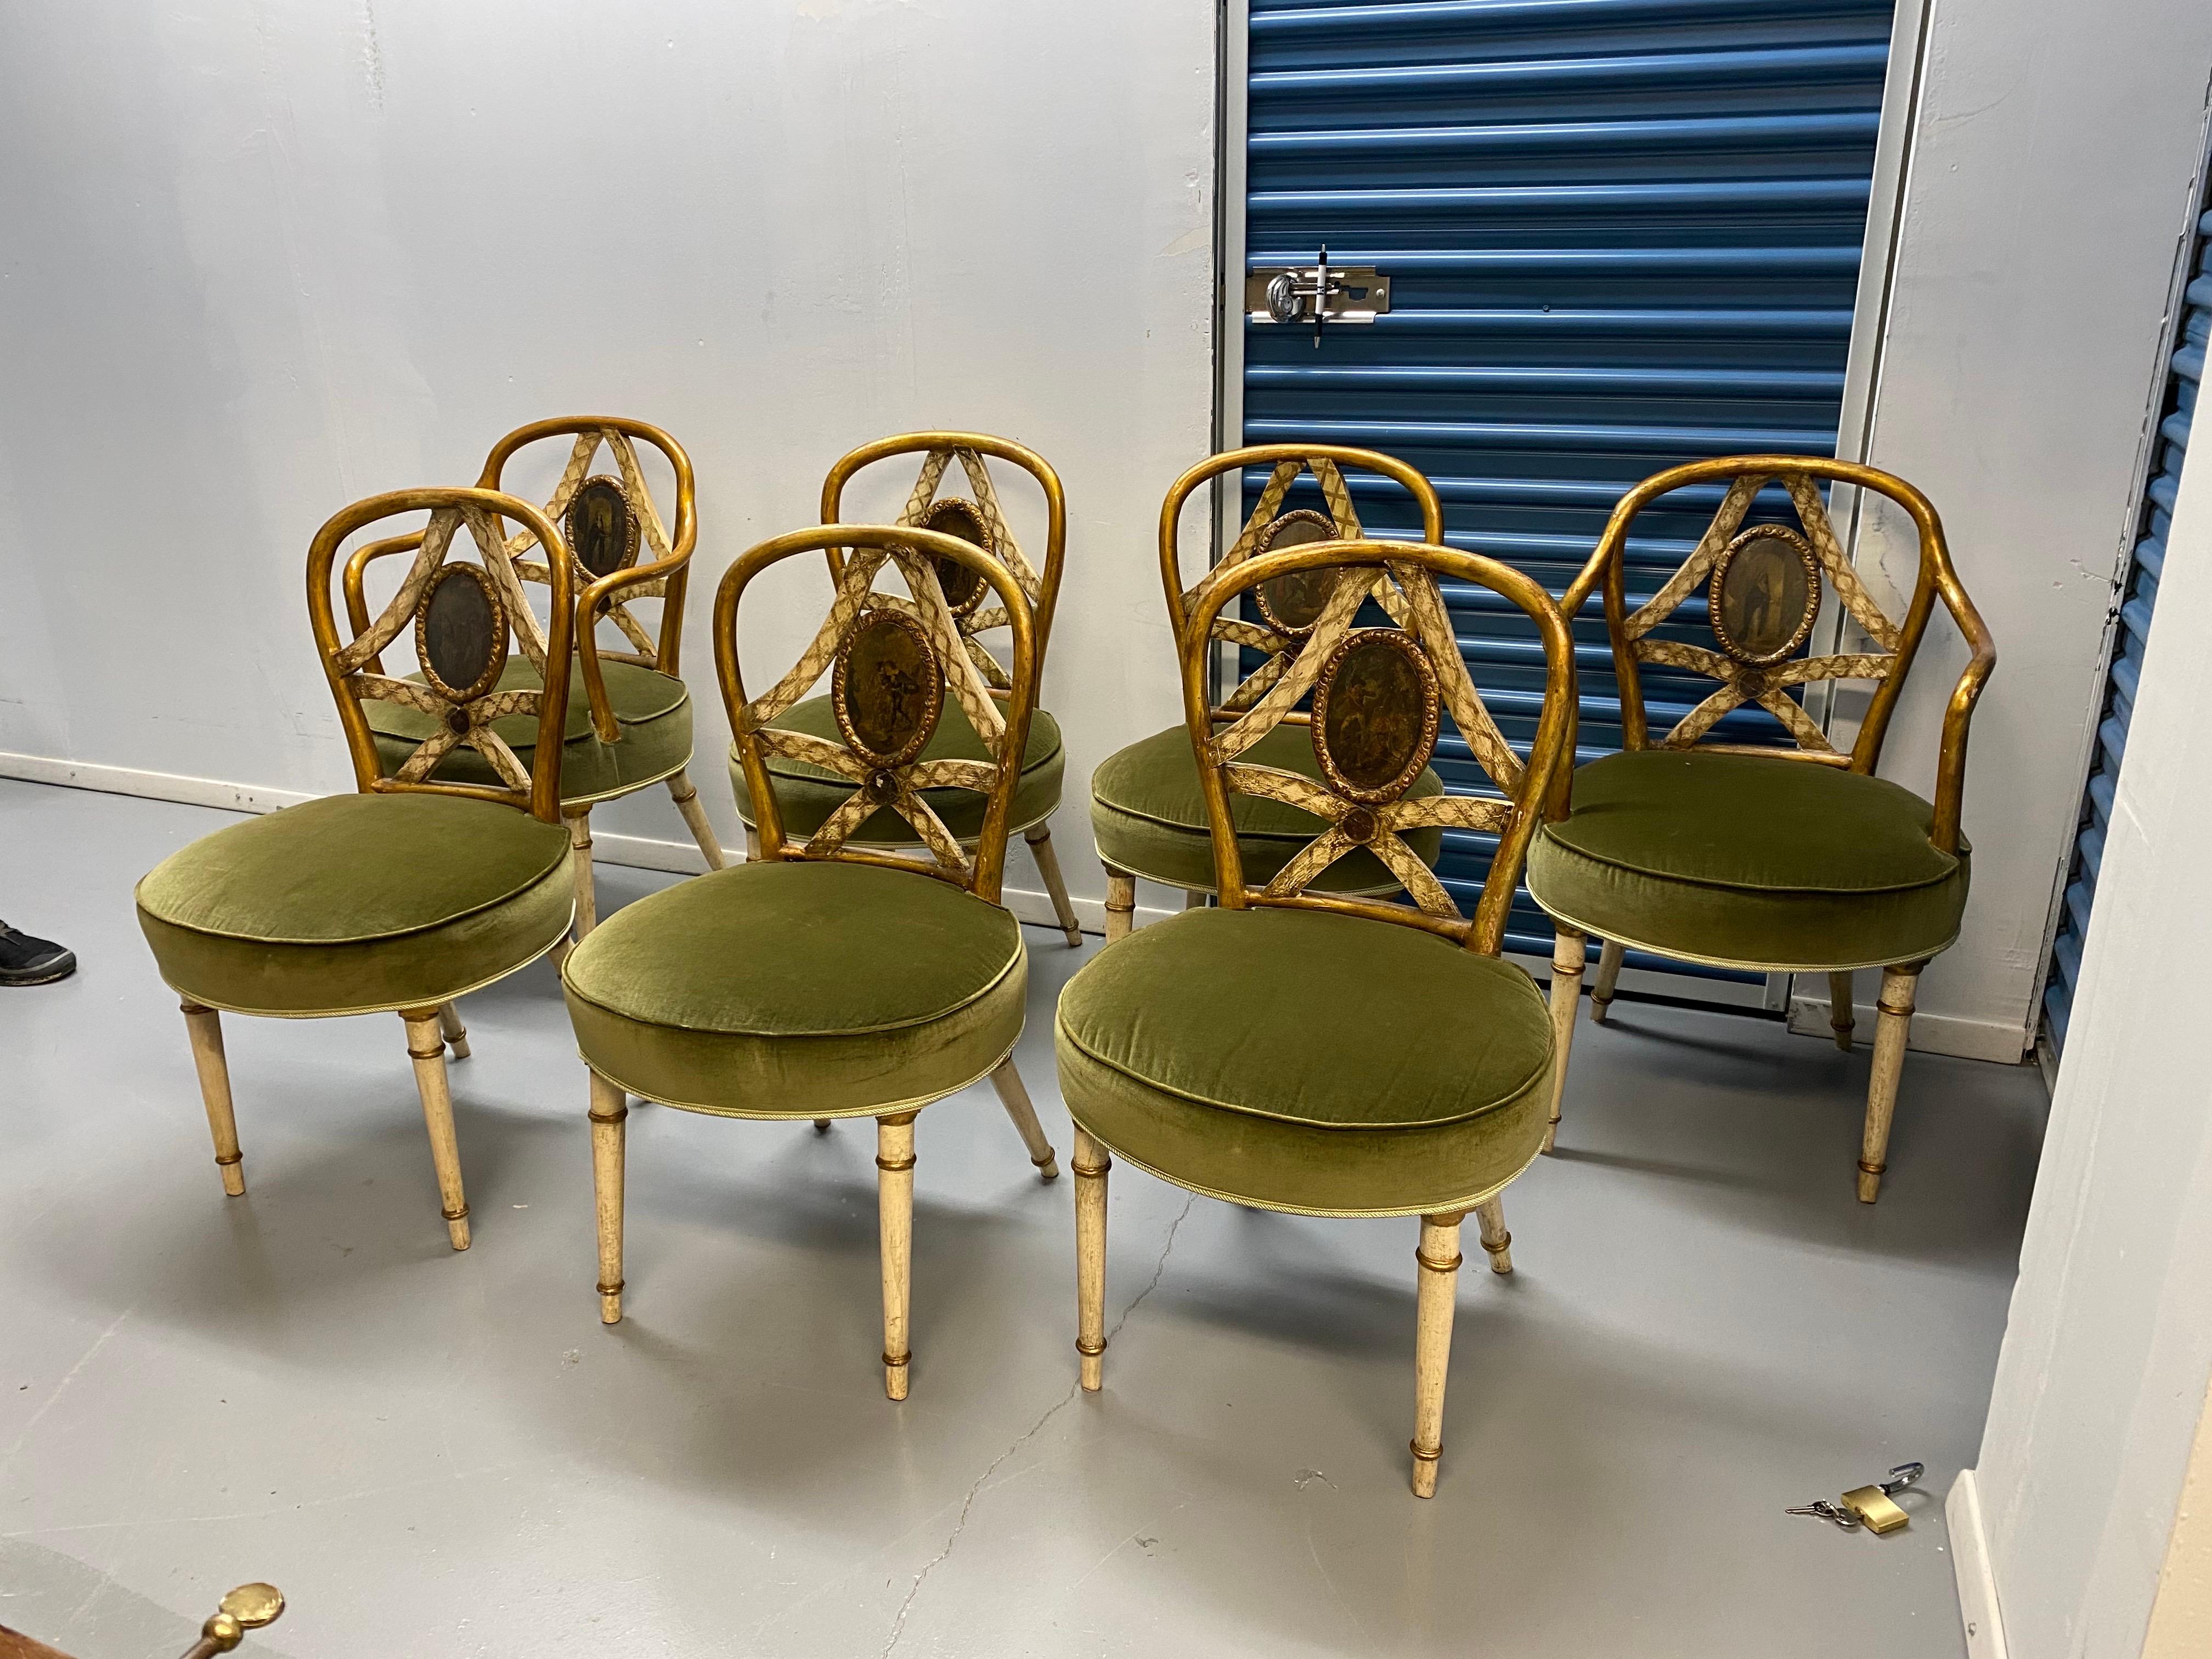 Set of Seven Late 18th Century Italian Painted Dining Chairs 
A rare and lovely set of Italian hand-painted dining chairs consisting of two armchairs and five side chairs hand-painted in gold paint on the upper back frame and arms with a cream